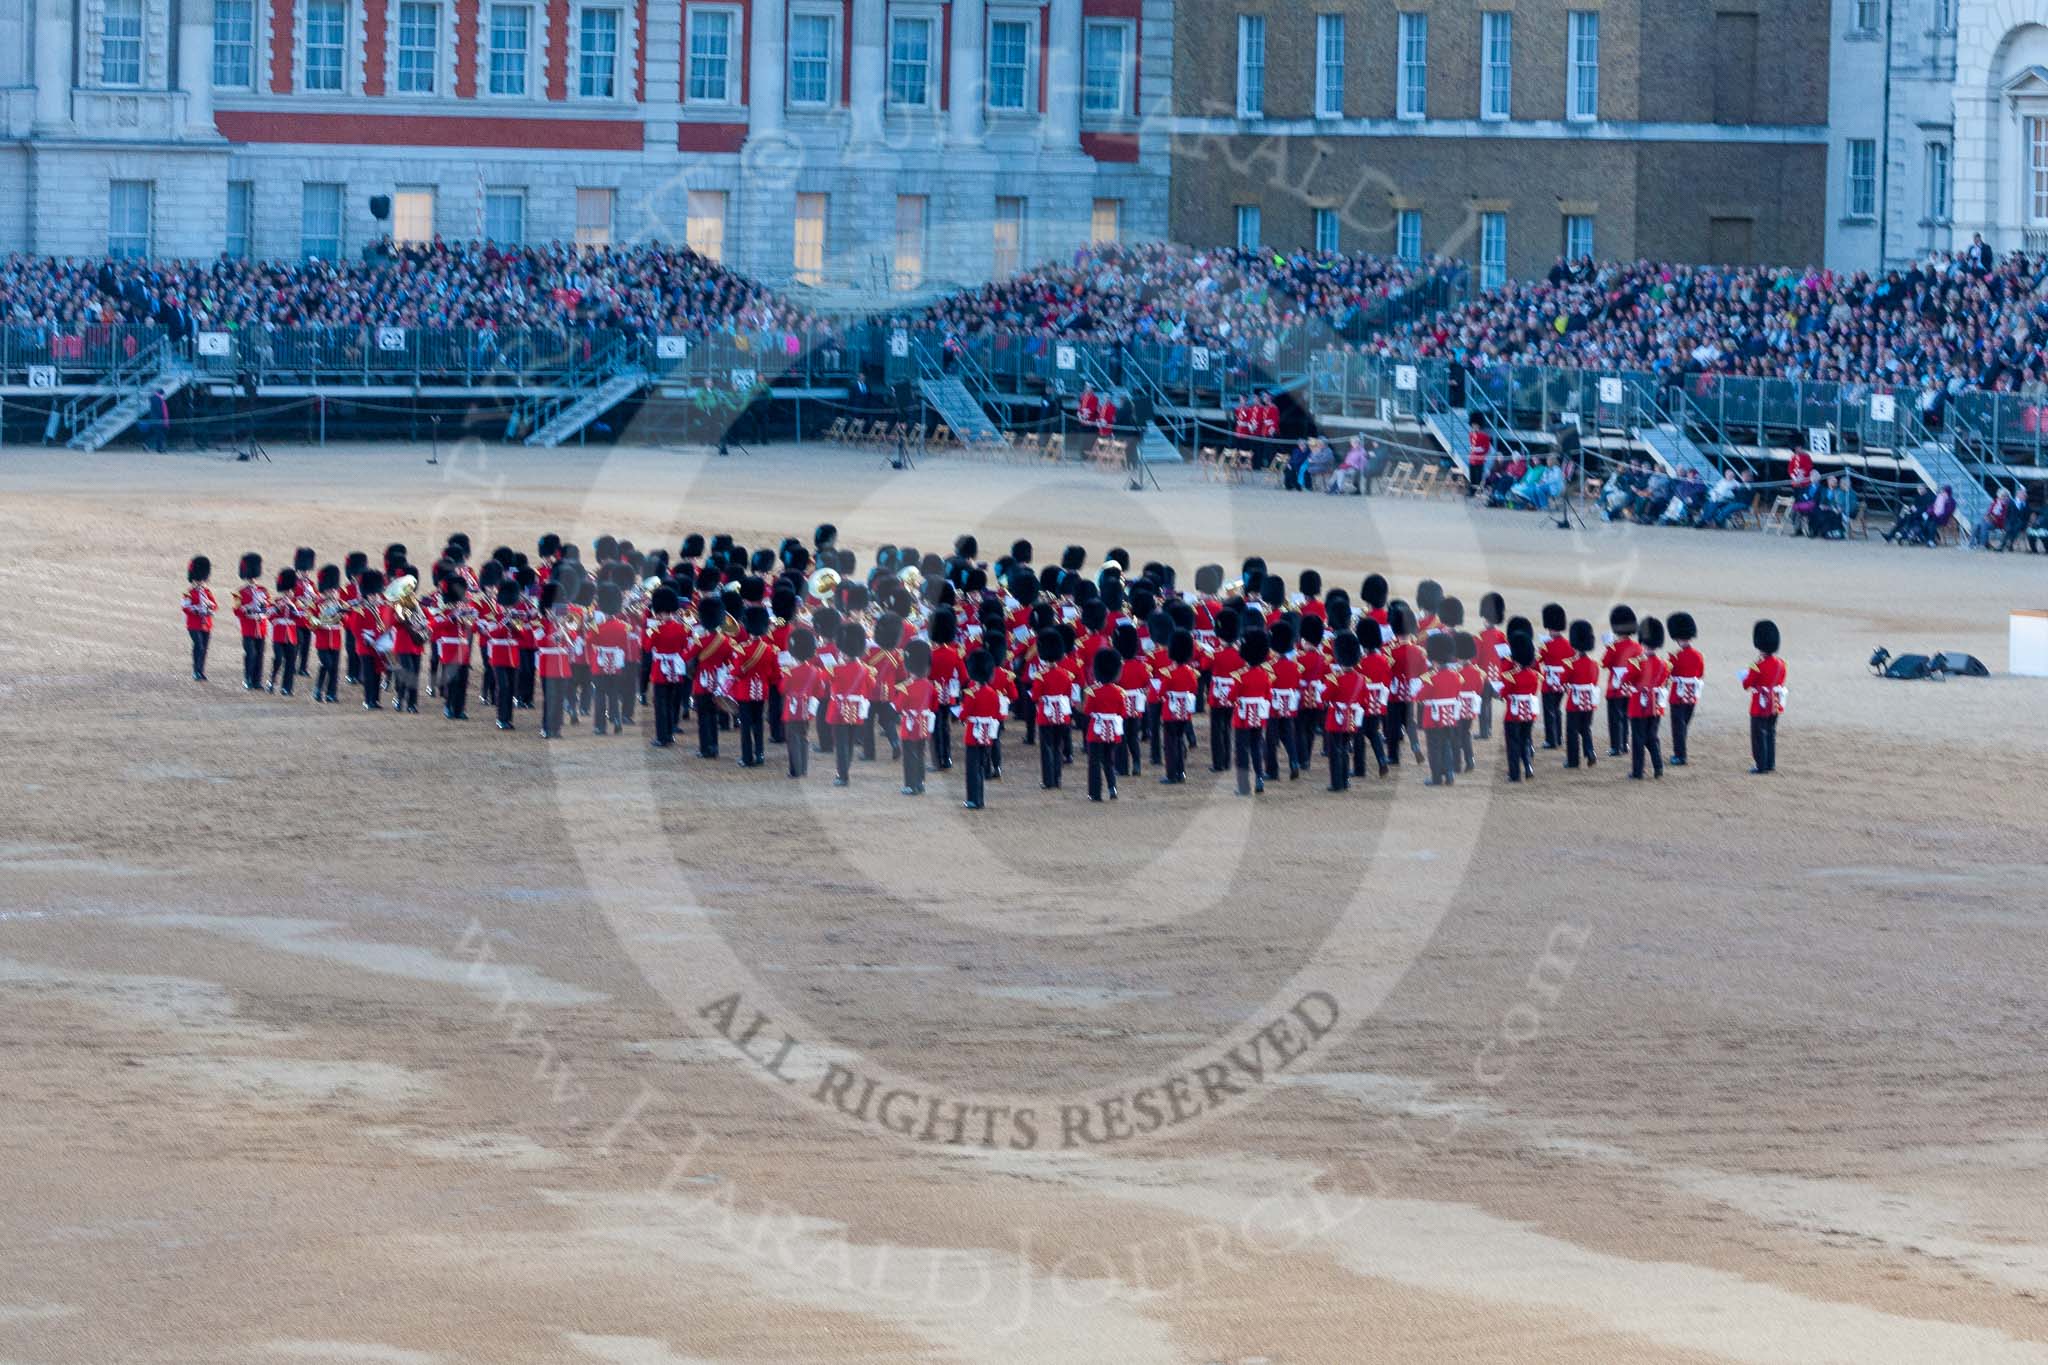 Beating Retreat 2015 - Waterloo 200.
Horse Guards Parade, Westminster,
London,

United Kingdom,
on 10 June 2015 at 21:12, image #263